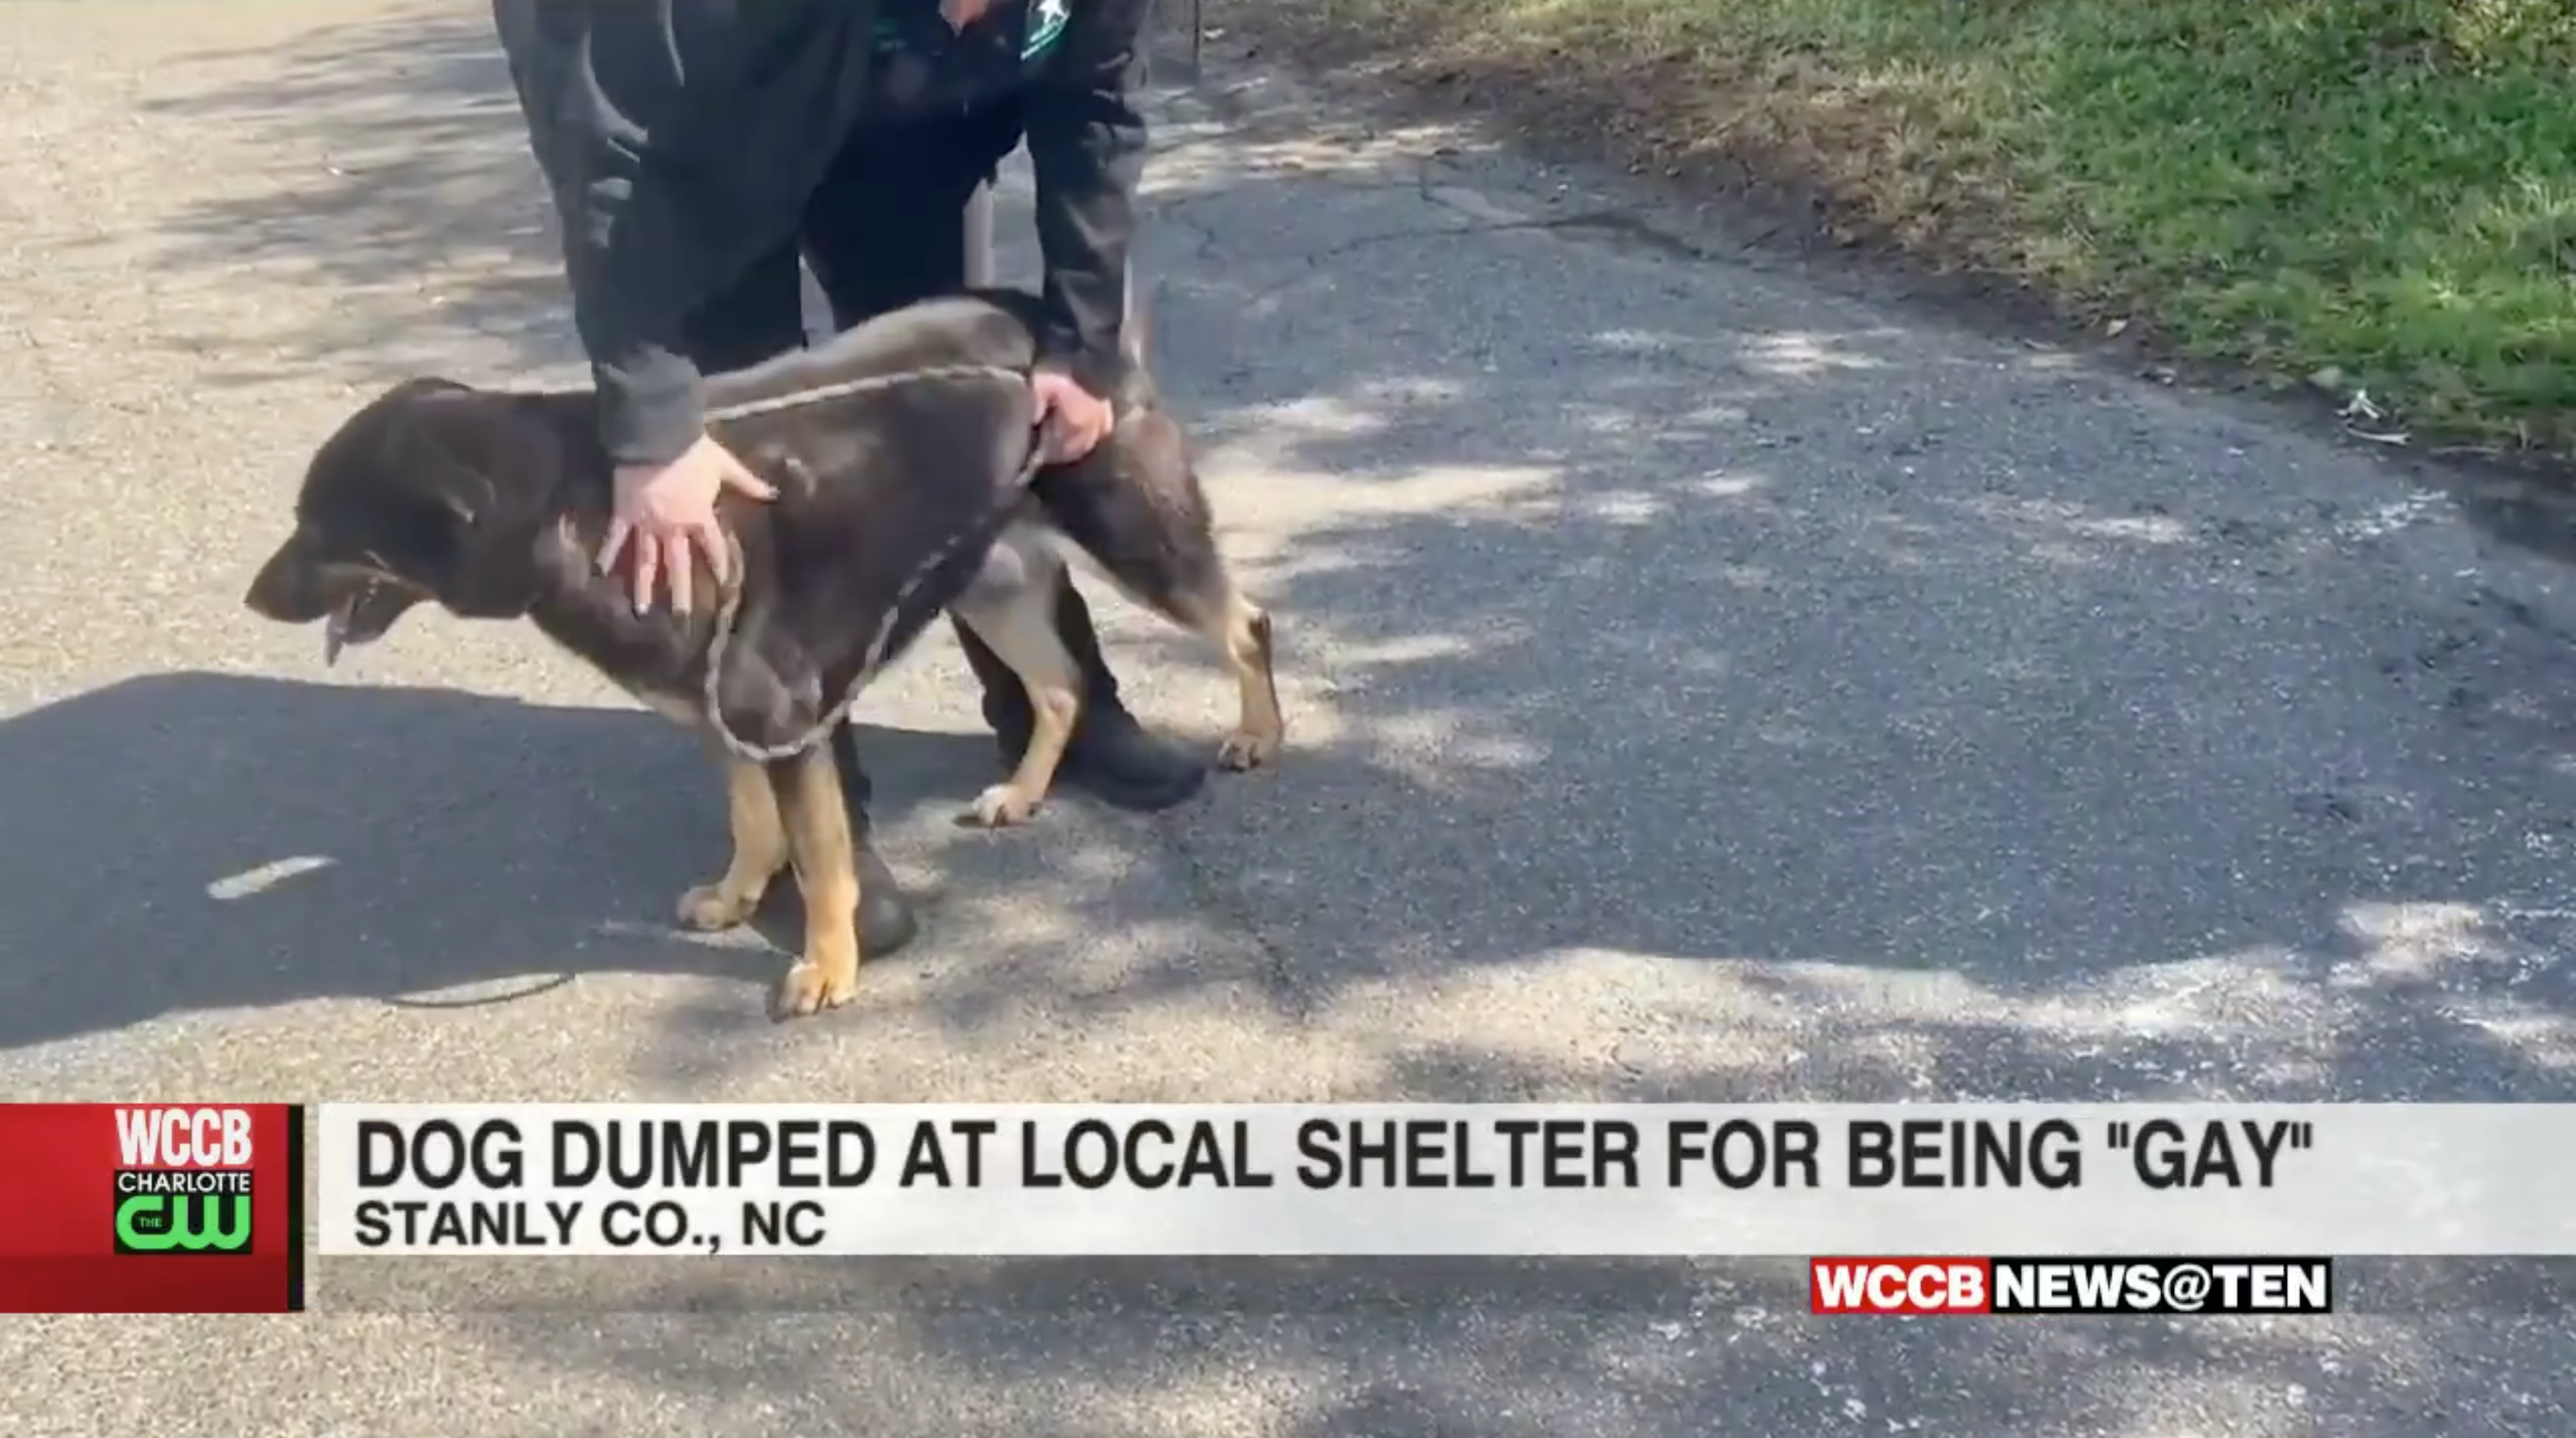 Fezco, a dog, was accused of being ‘gay’ by his owners and left at a pet shelter in North Carolina